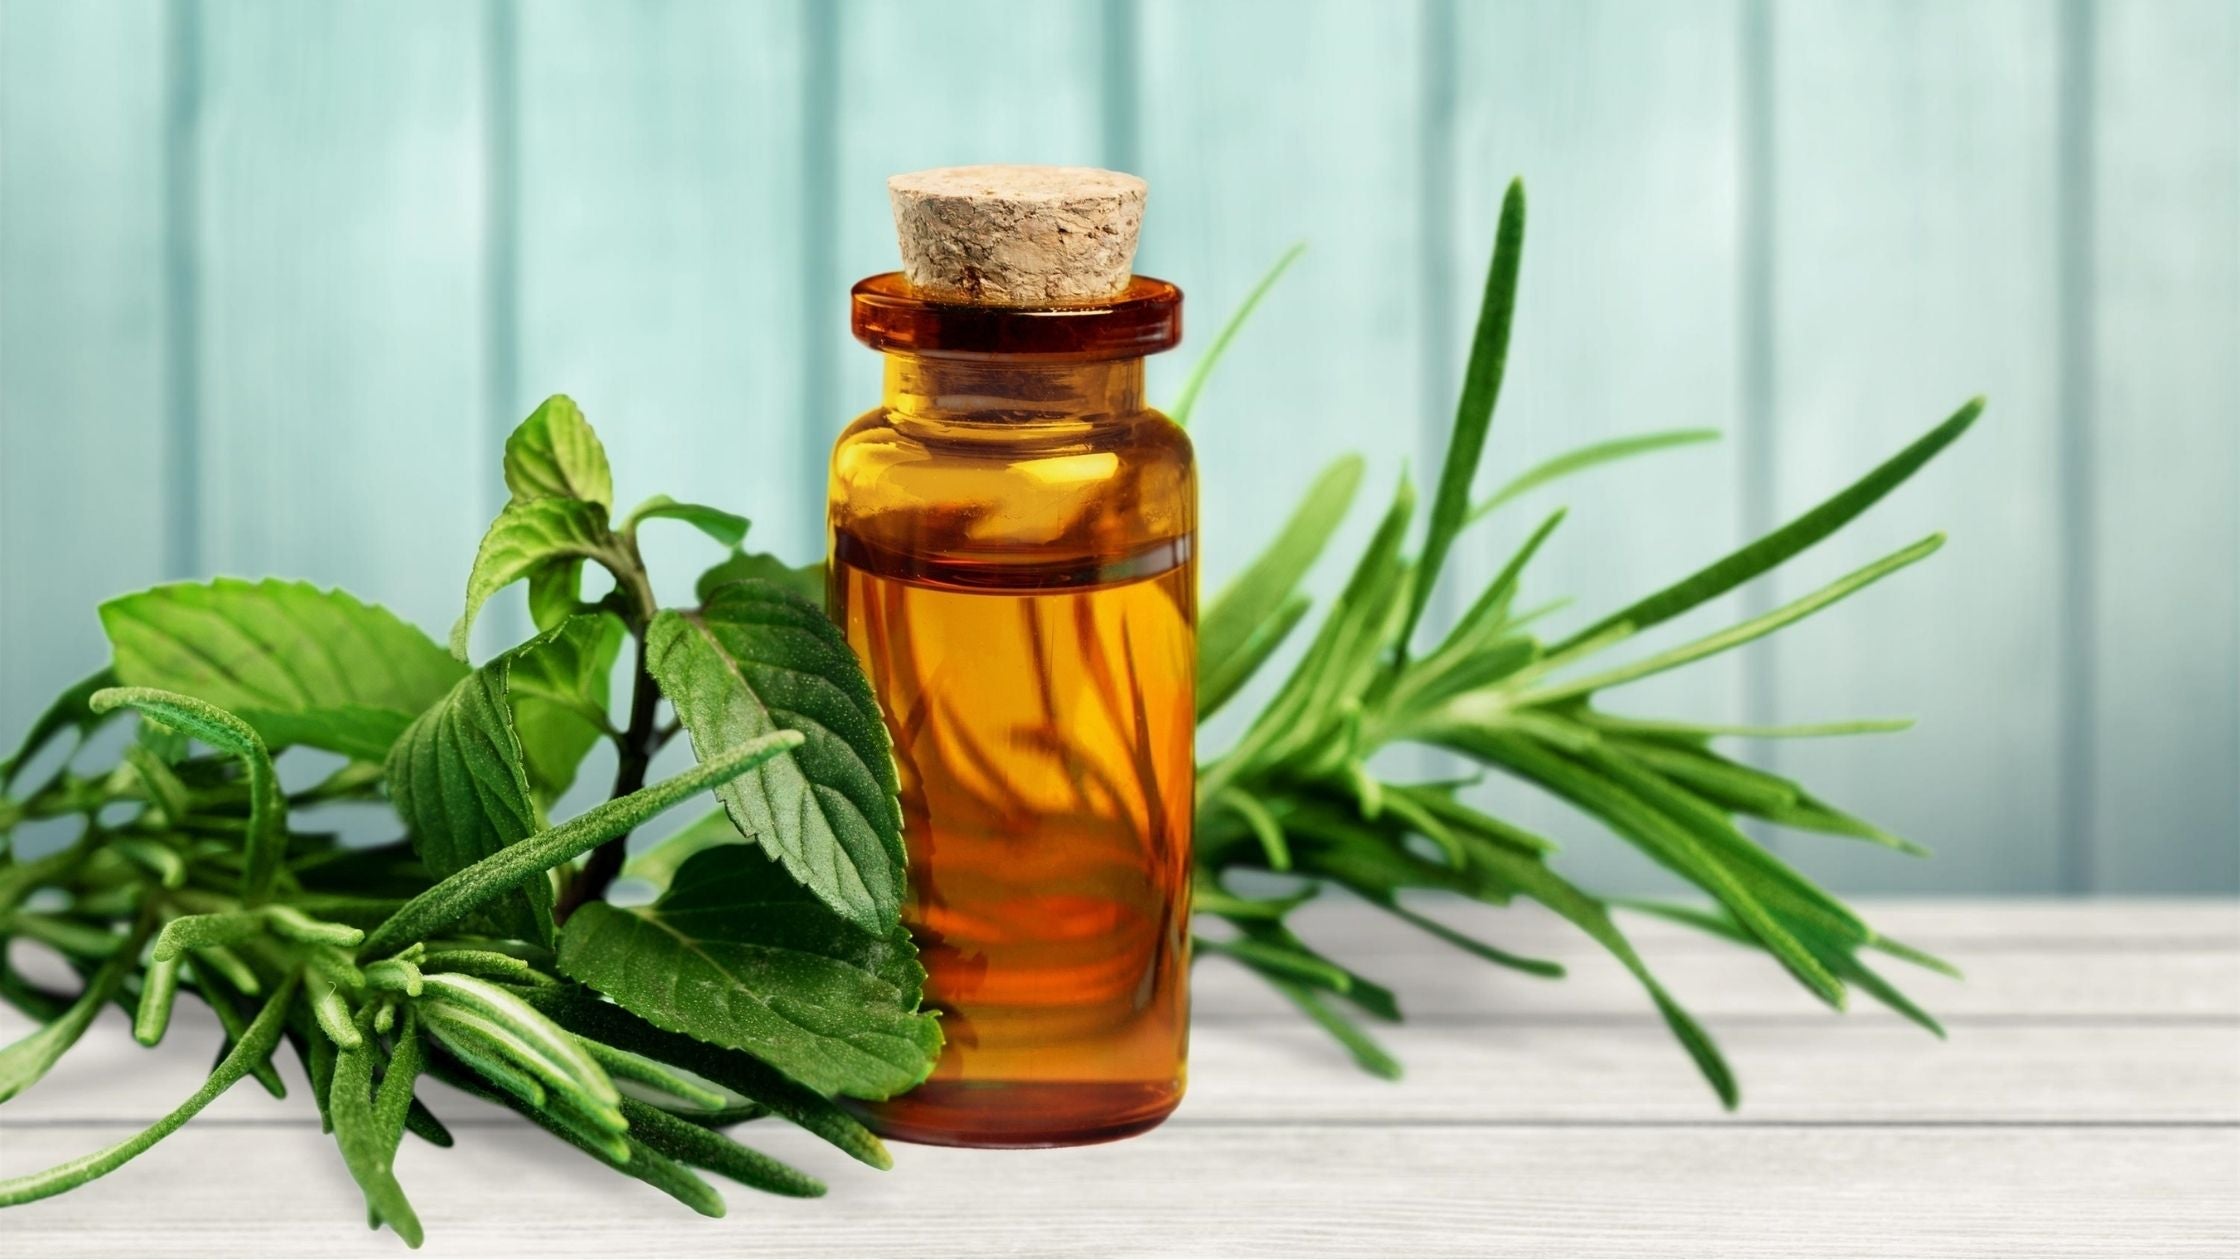 Tea Tree Oil for Acne: Does It Work and How to Use It Safely